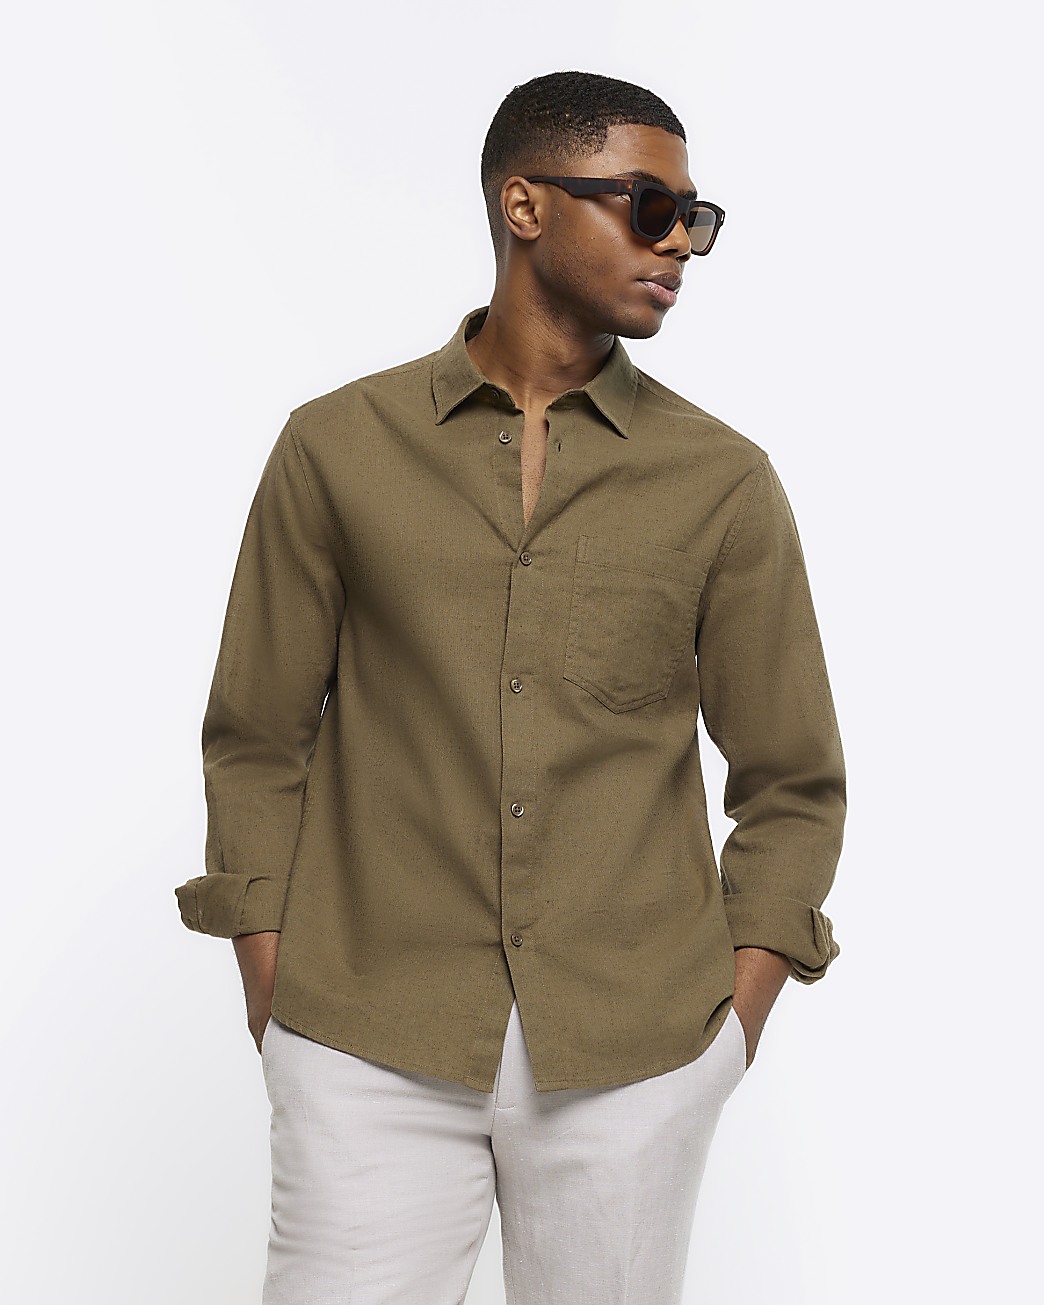 Overshirts for Men